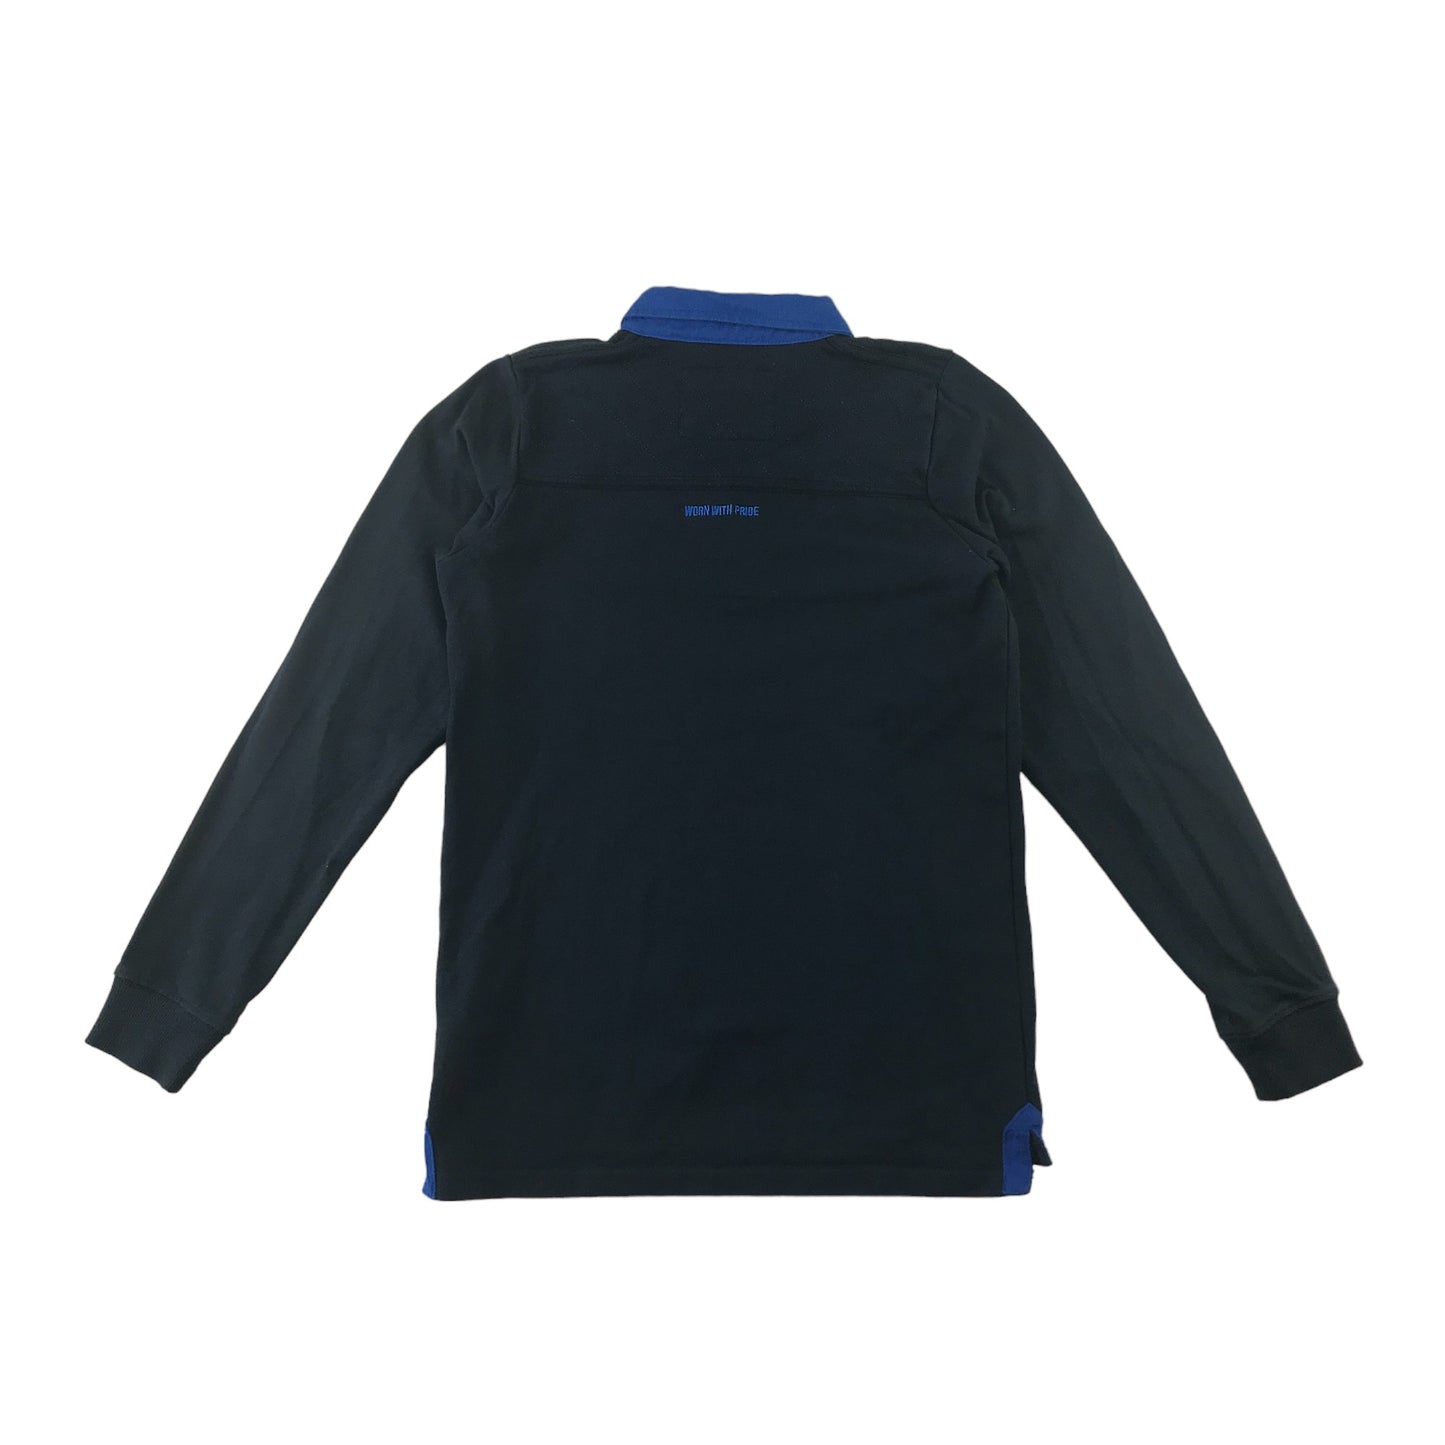 Rugby Heritage Sports Top Age 11 Black with Blue Collar Cotton